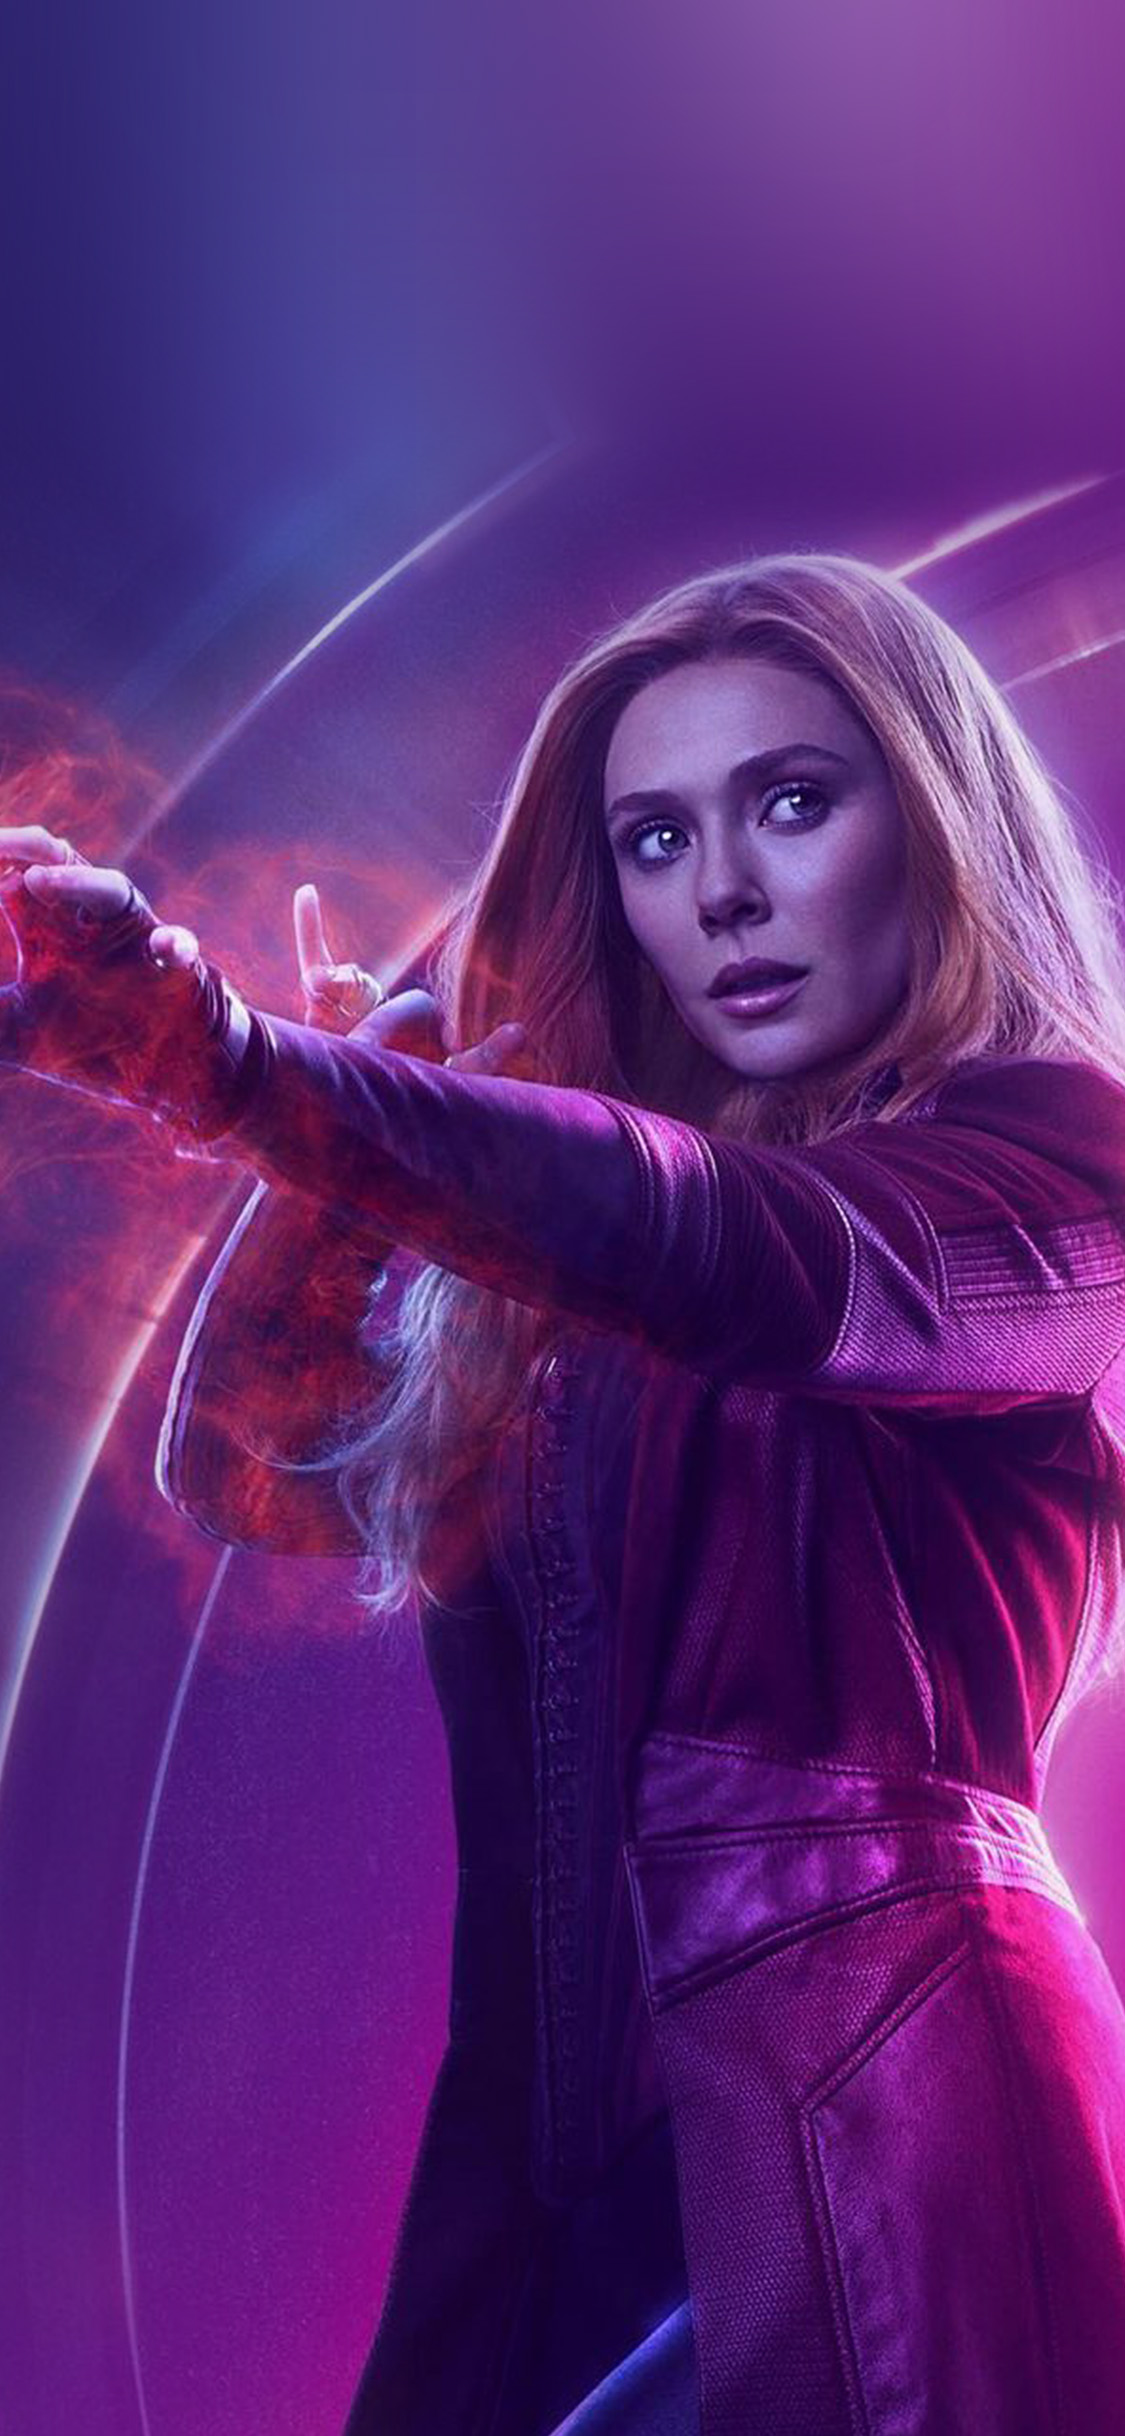 Com Apple Iphone Wallpaper Be91 Scarlet Witch Avengers - Scarlet Witch Hd Wallpaper For Iphone - HD Wallpaper 